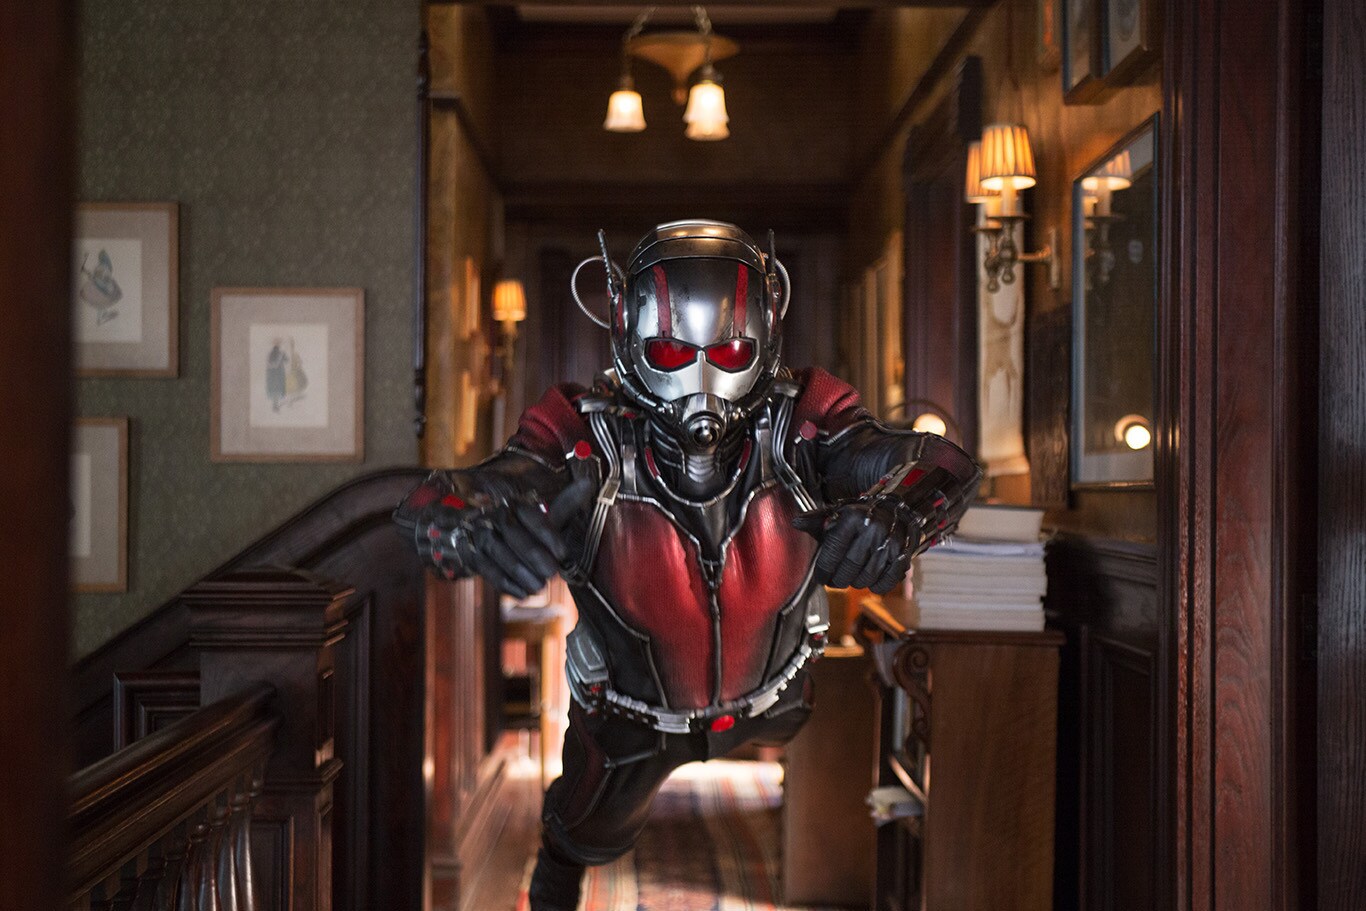 Ant-Man diving forward in the movie Ant-Man